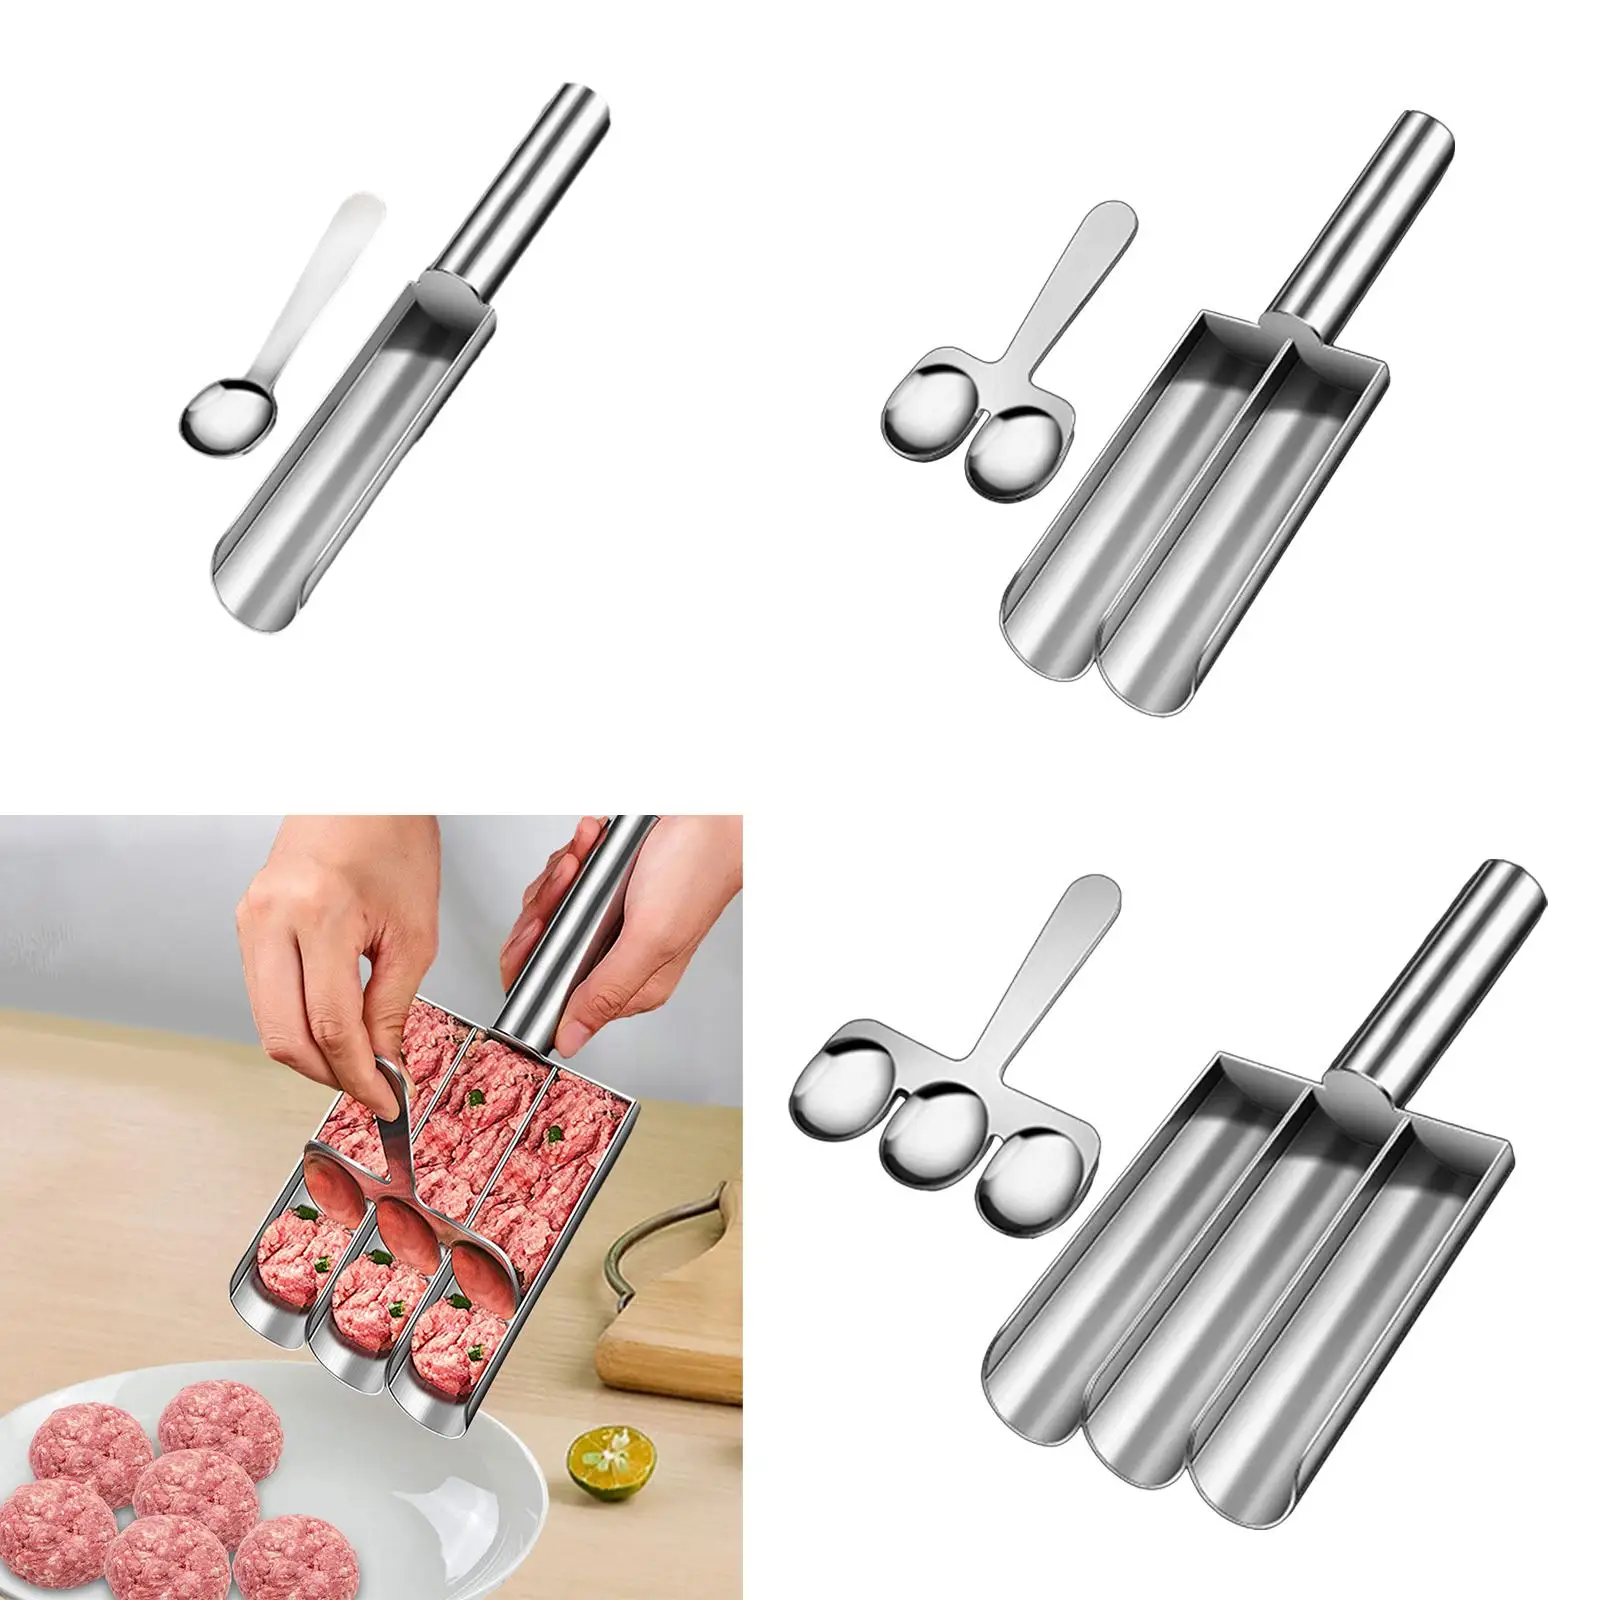 Stainless Steel Meatball Maker for Beef Meat Ball Balls Cooking